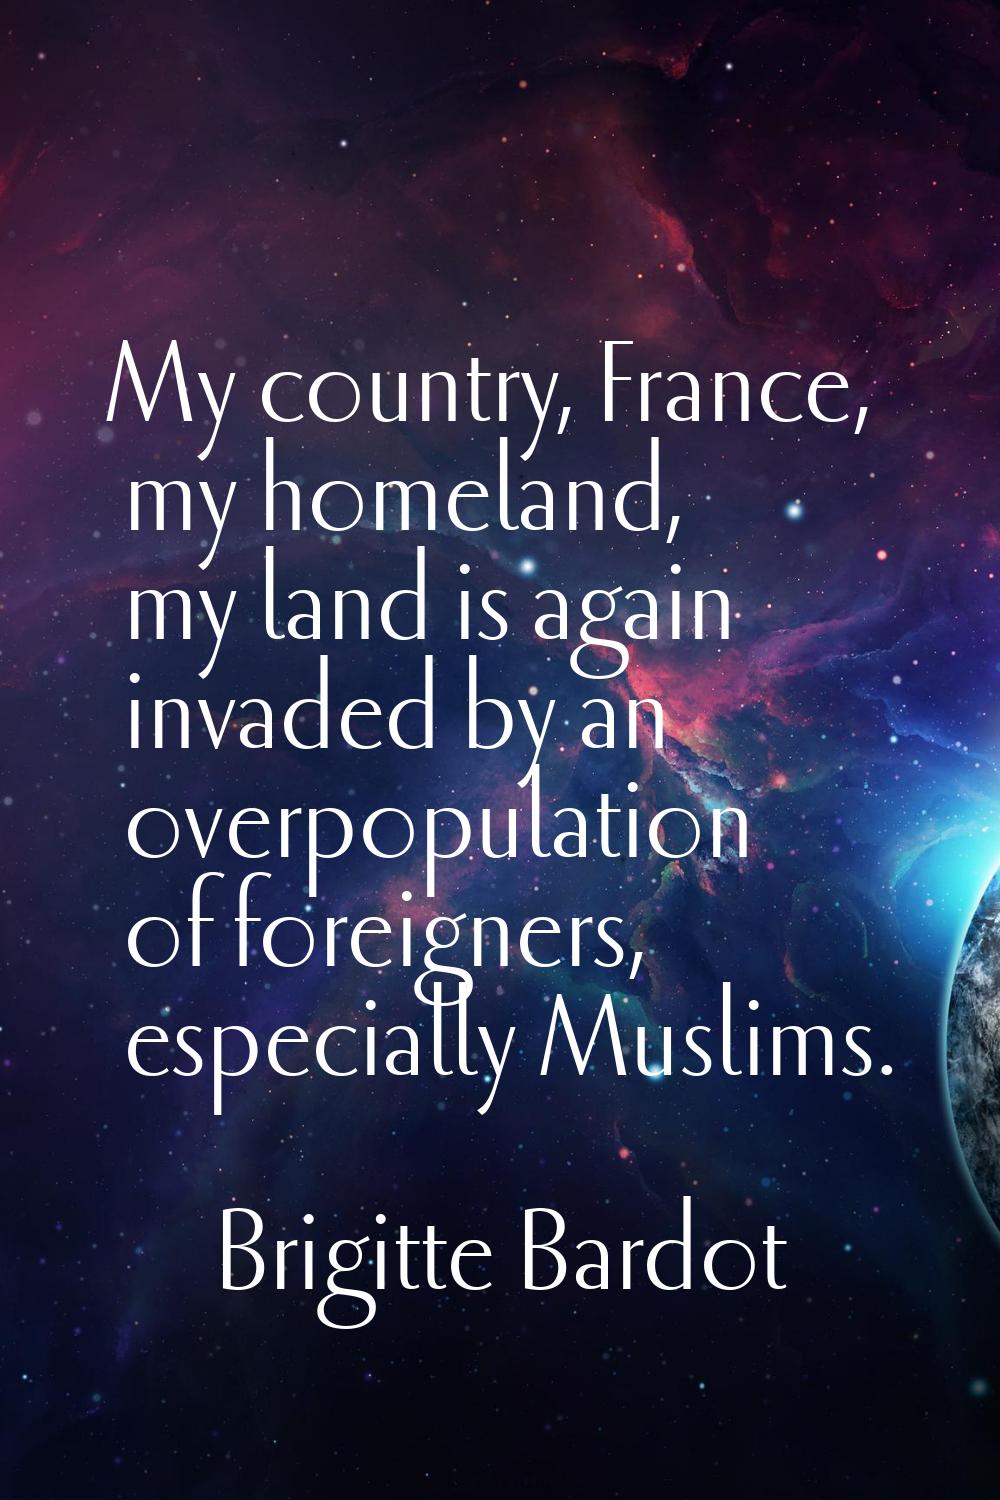 My country, France, my homeland, my land is again invaded by an overpopulation of foreigners, espec